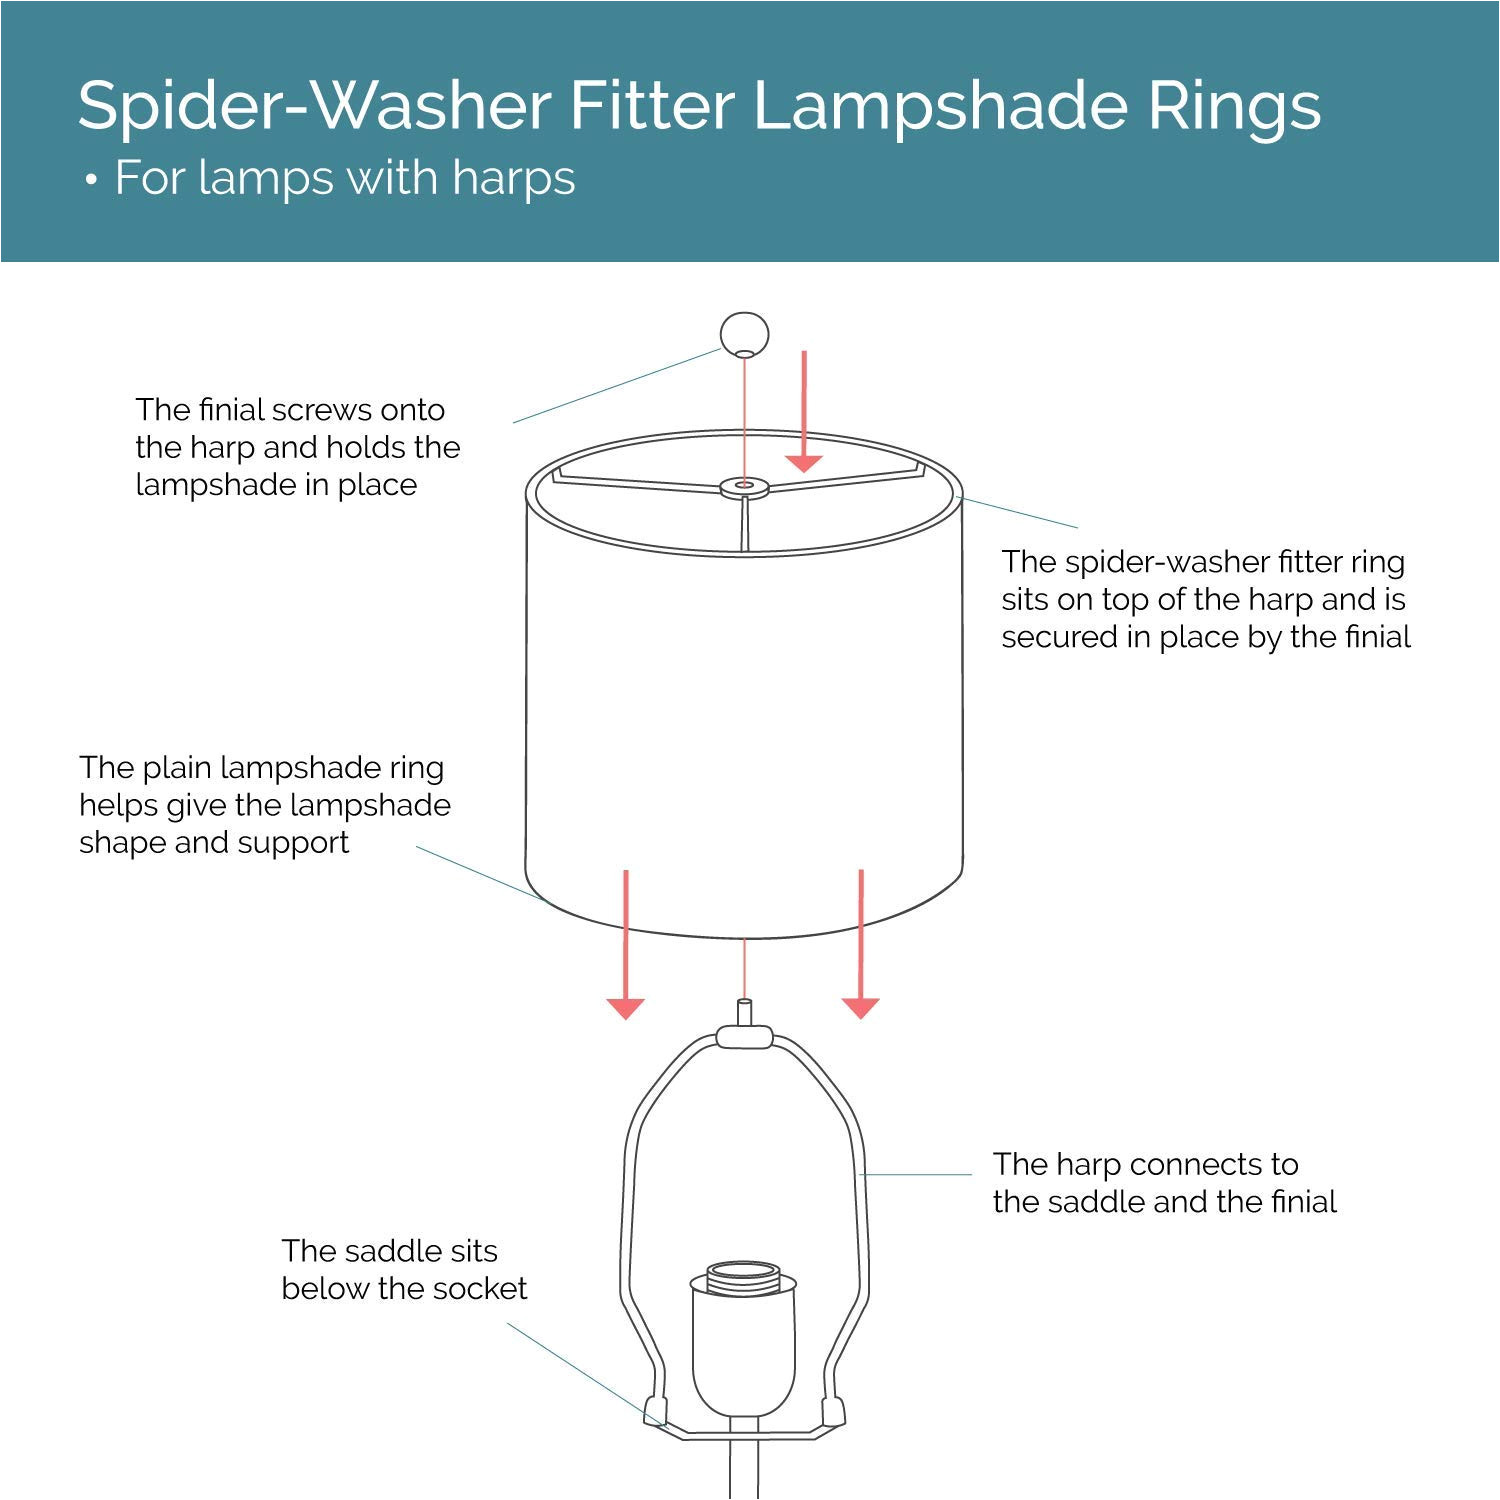 lamp shade ring set to make a diy drum ring lamp shade us style spider fitter that connects to lamp harps strong galvanized steel ring for lamp shade